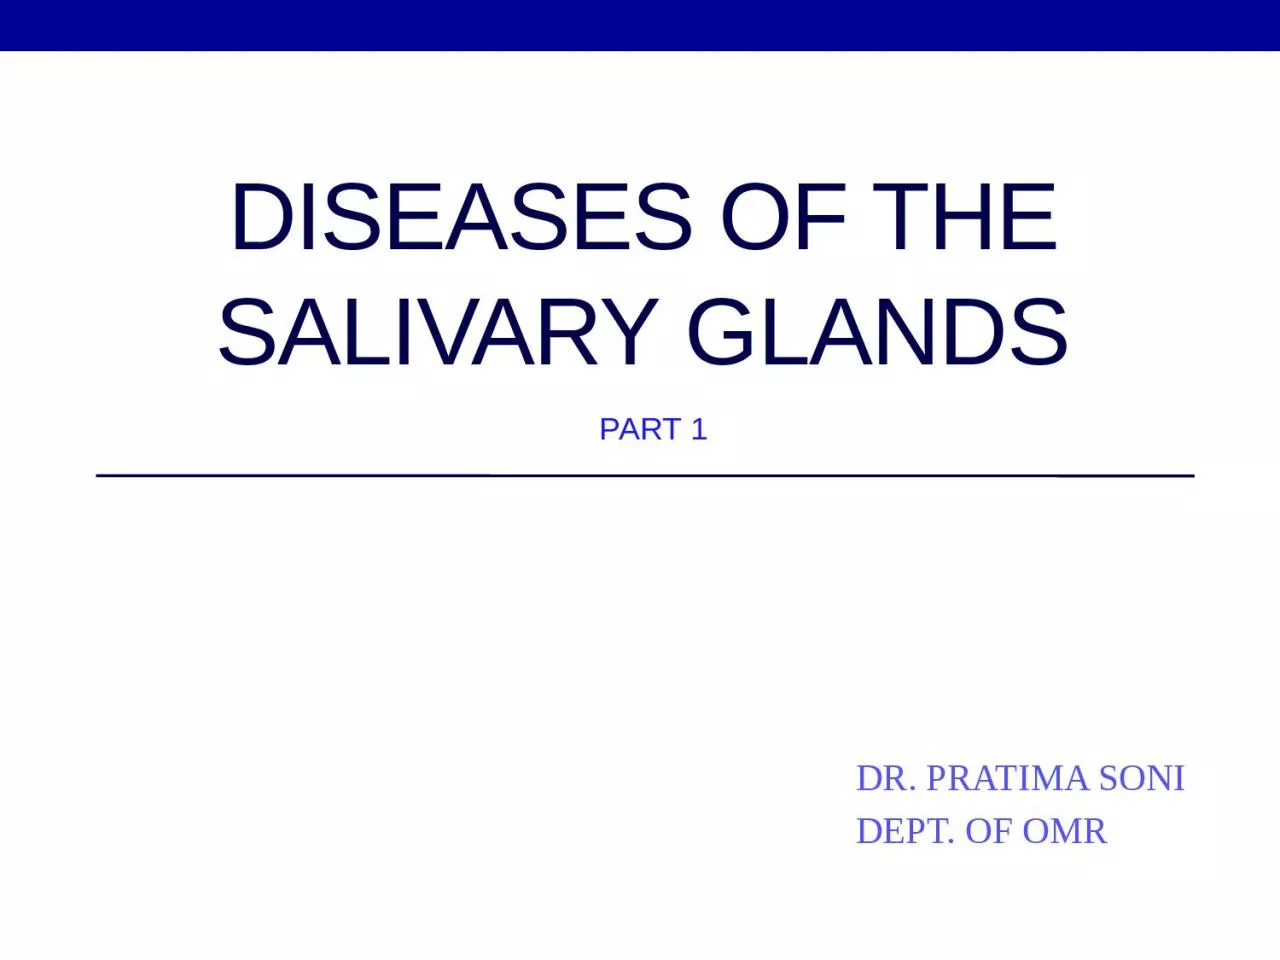 DISEASES OF THE SALIVARY GLANDS